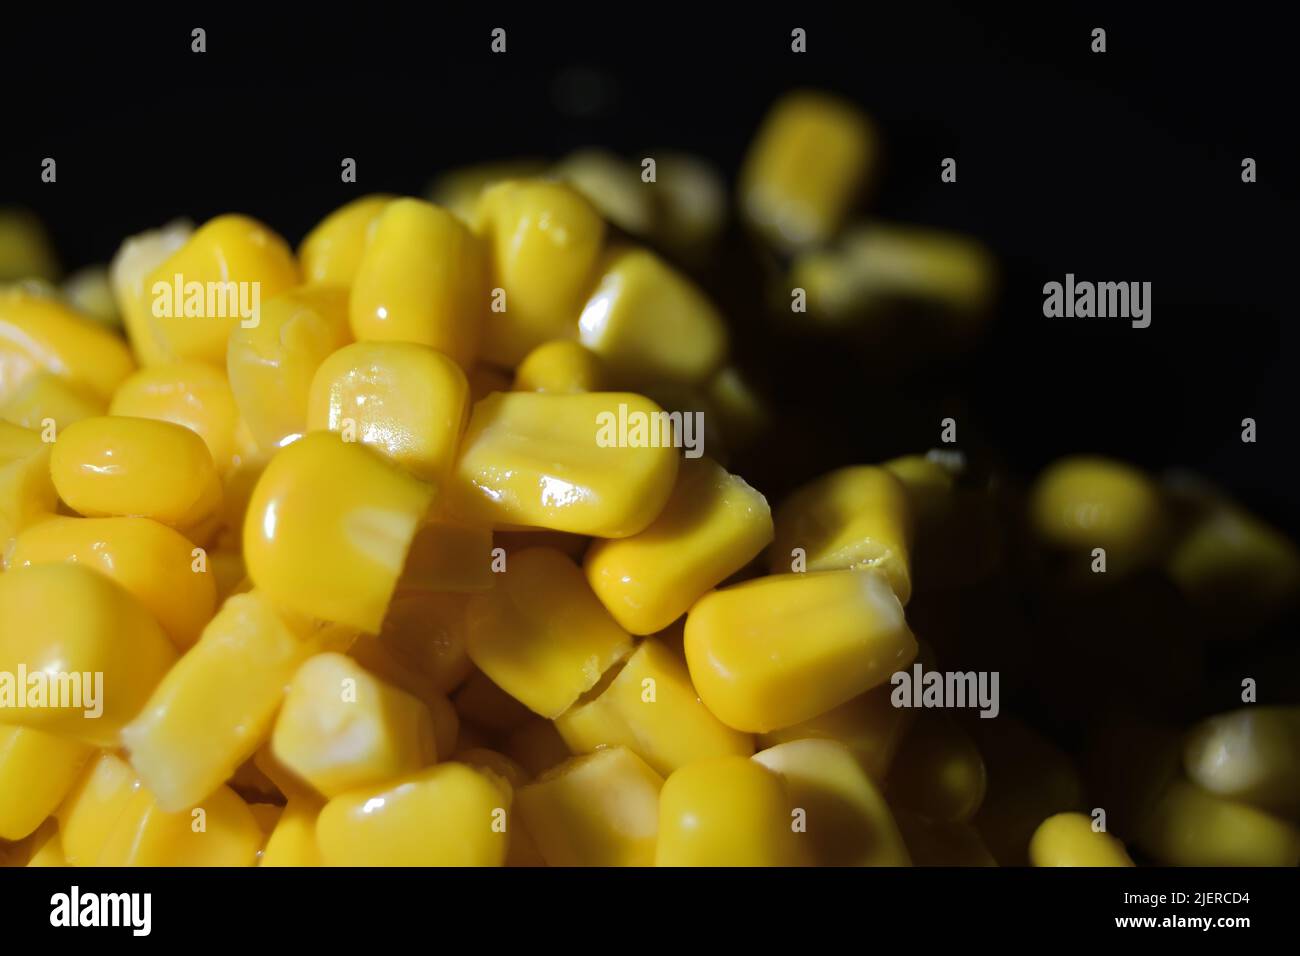 Boiled corn with light intimate Stock Photo